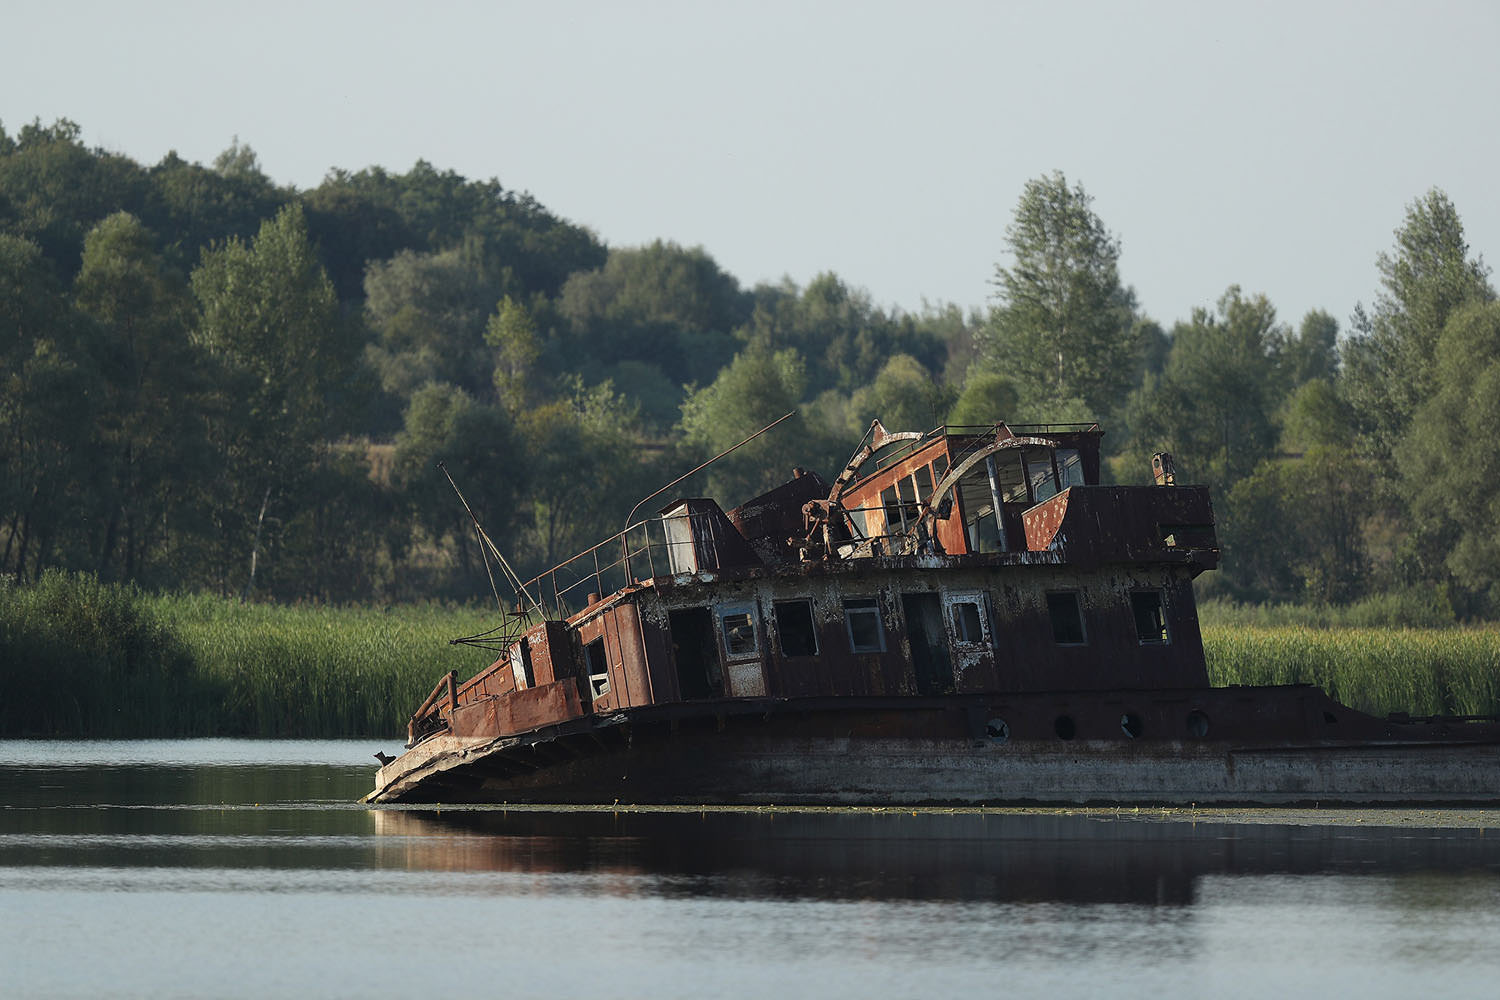 Chernobyl barge that sand from the disaster's explosions